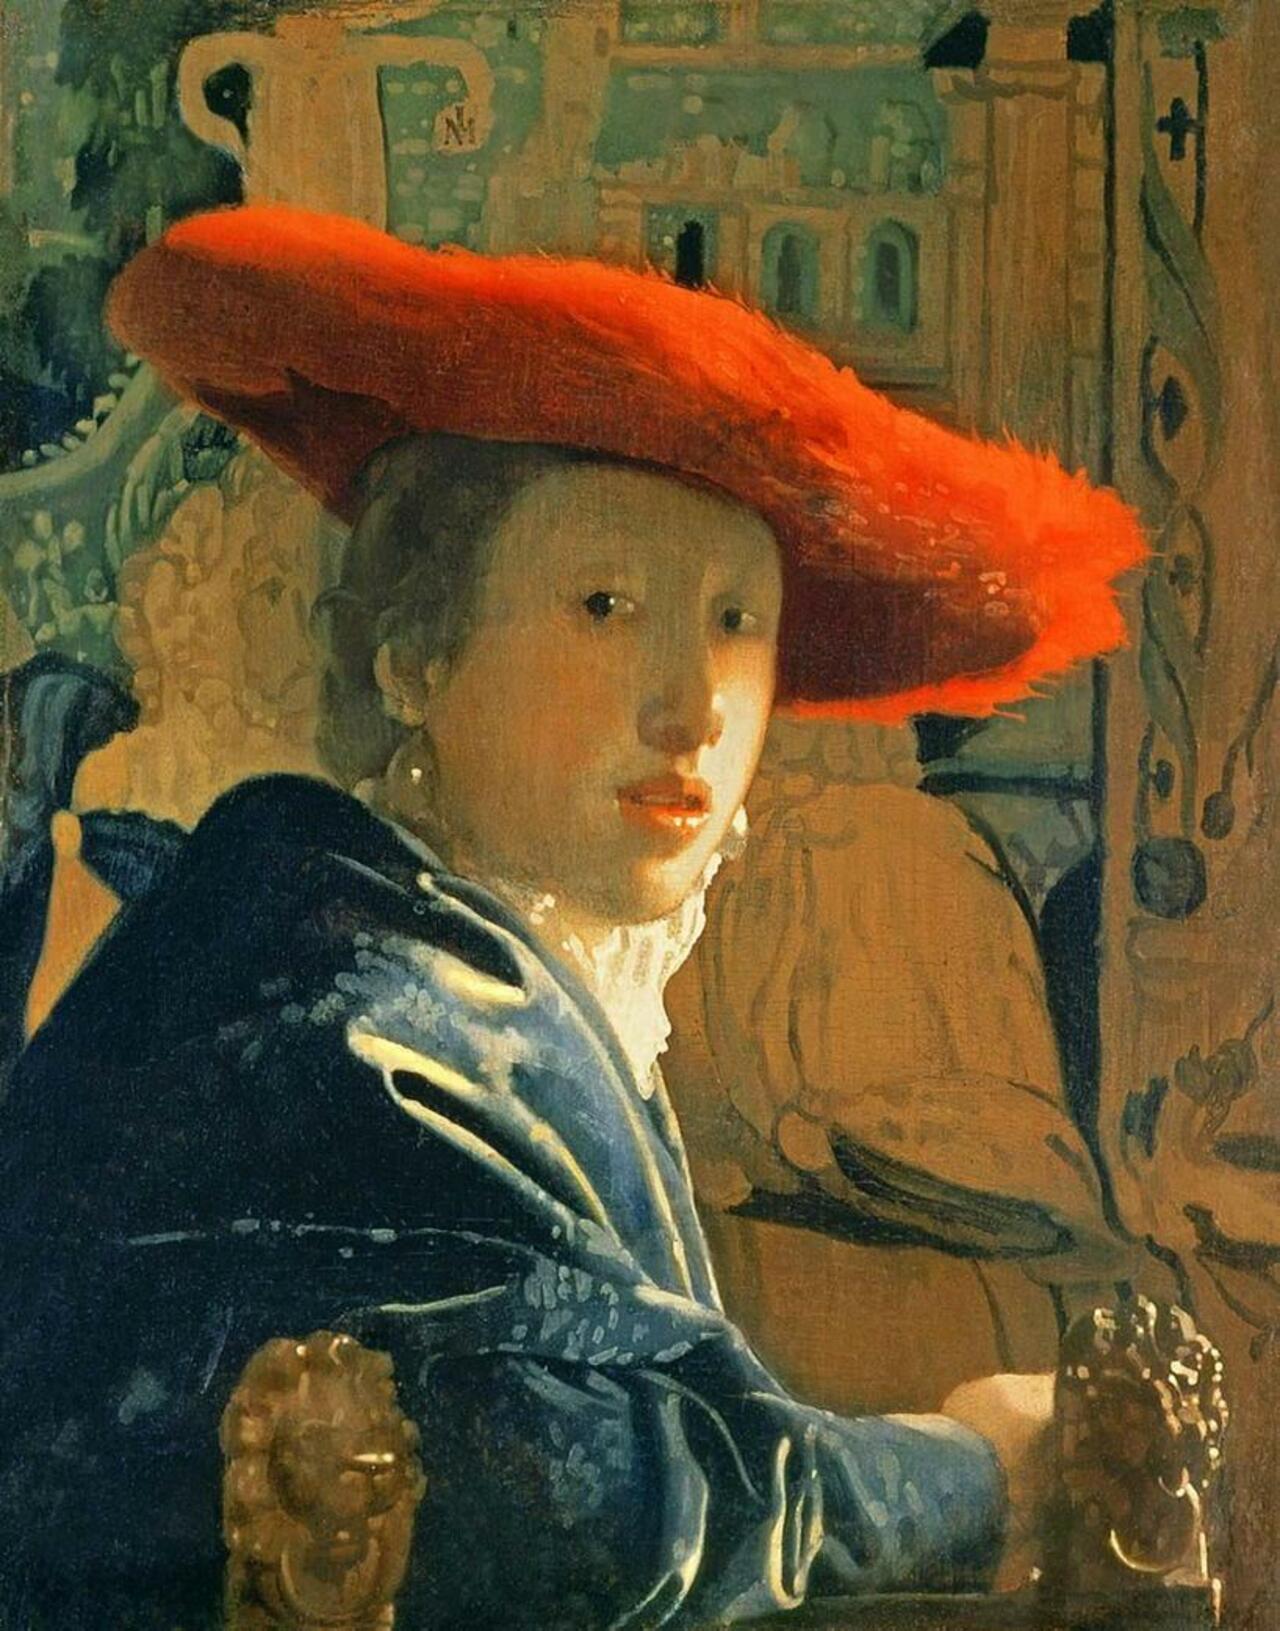 Great #art from @Art_Authority: Girl with a Red Hat by Vermeer, Jan http://t.co/VShbuUXmce